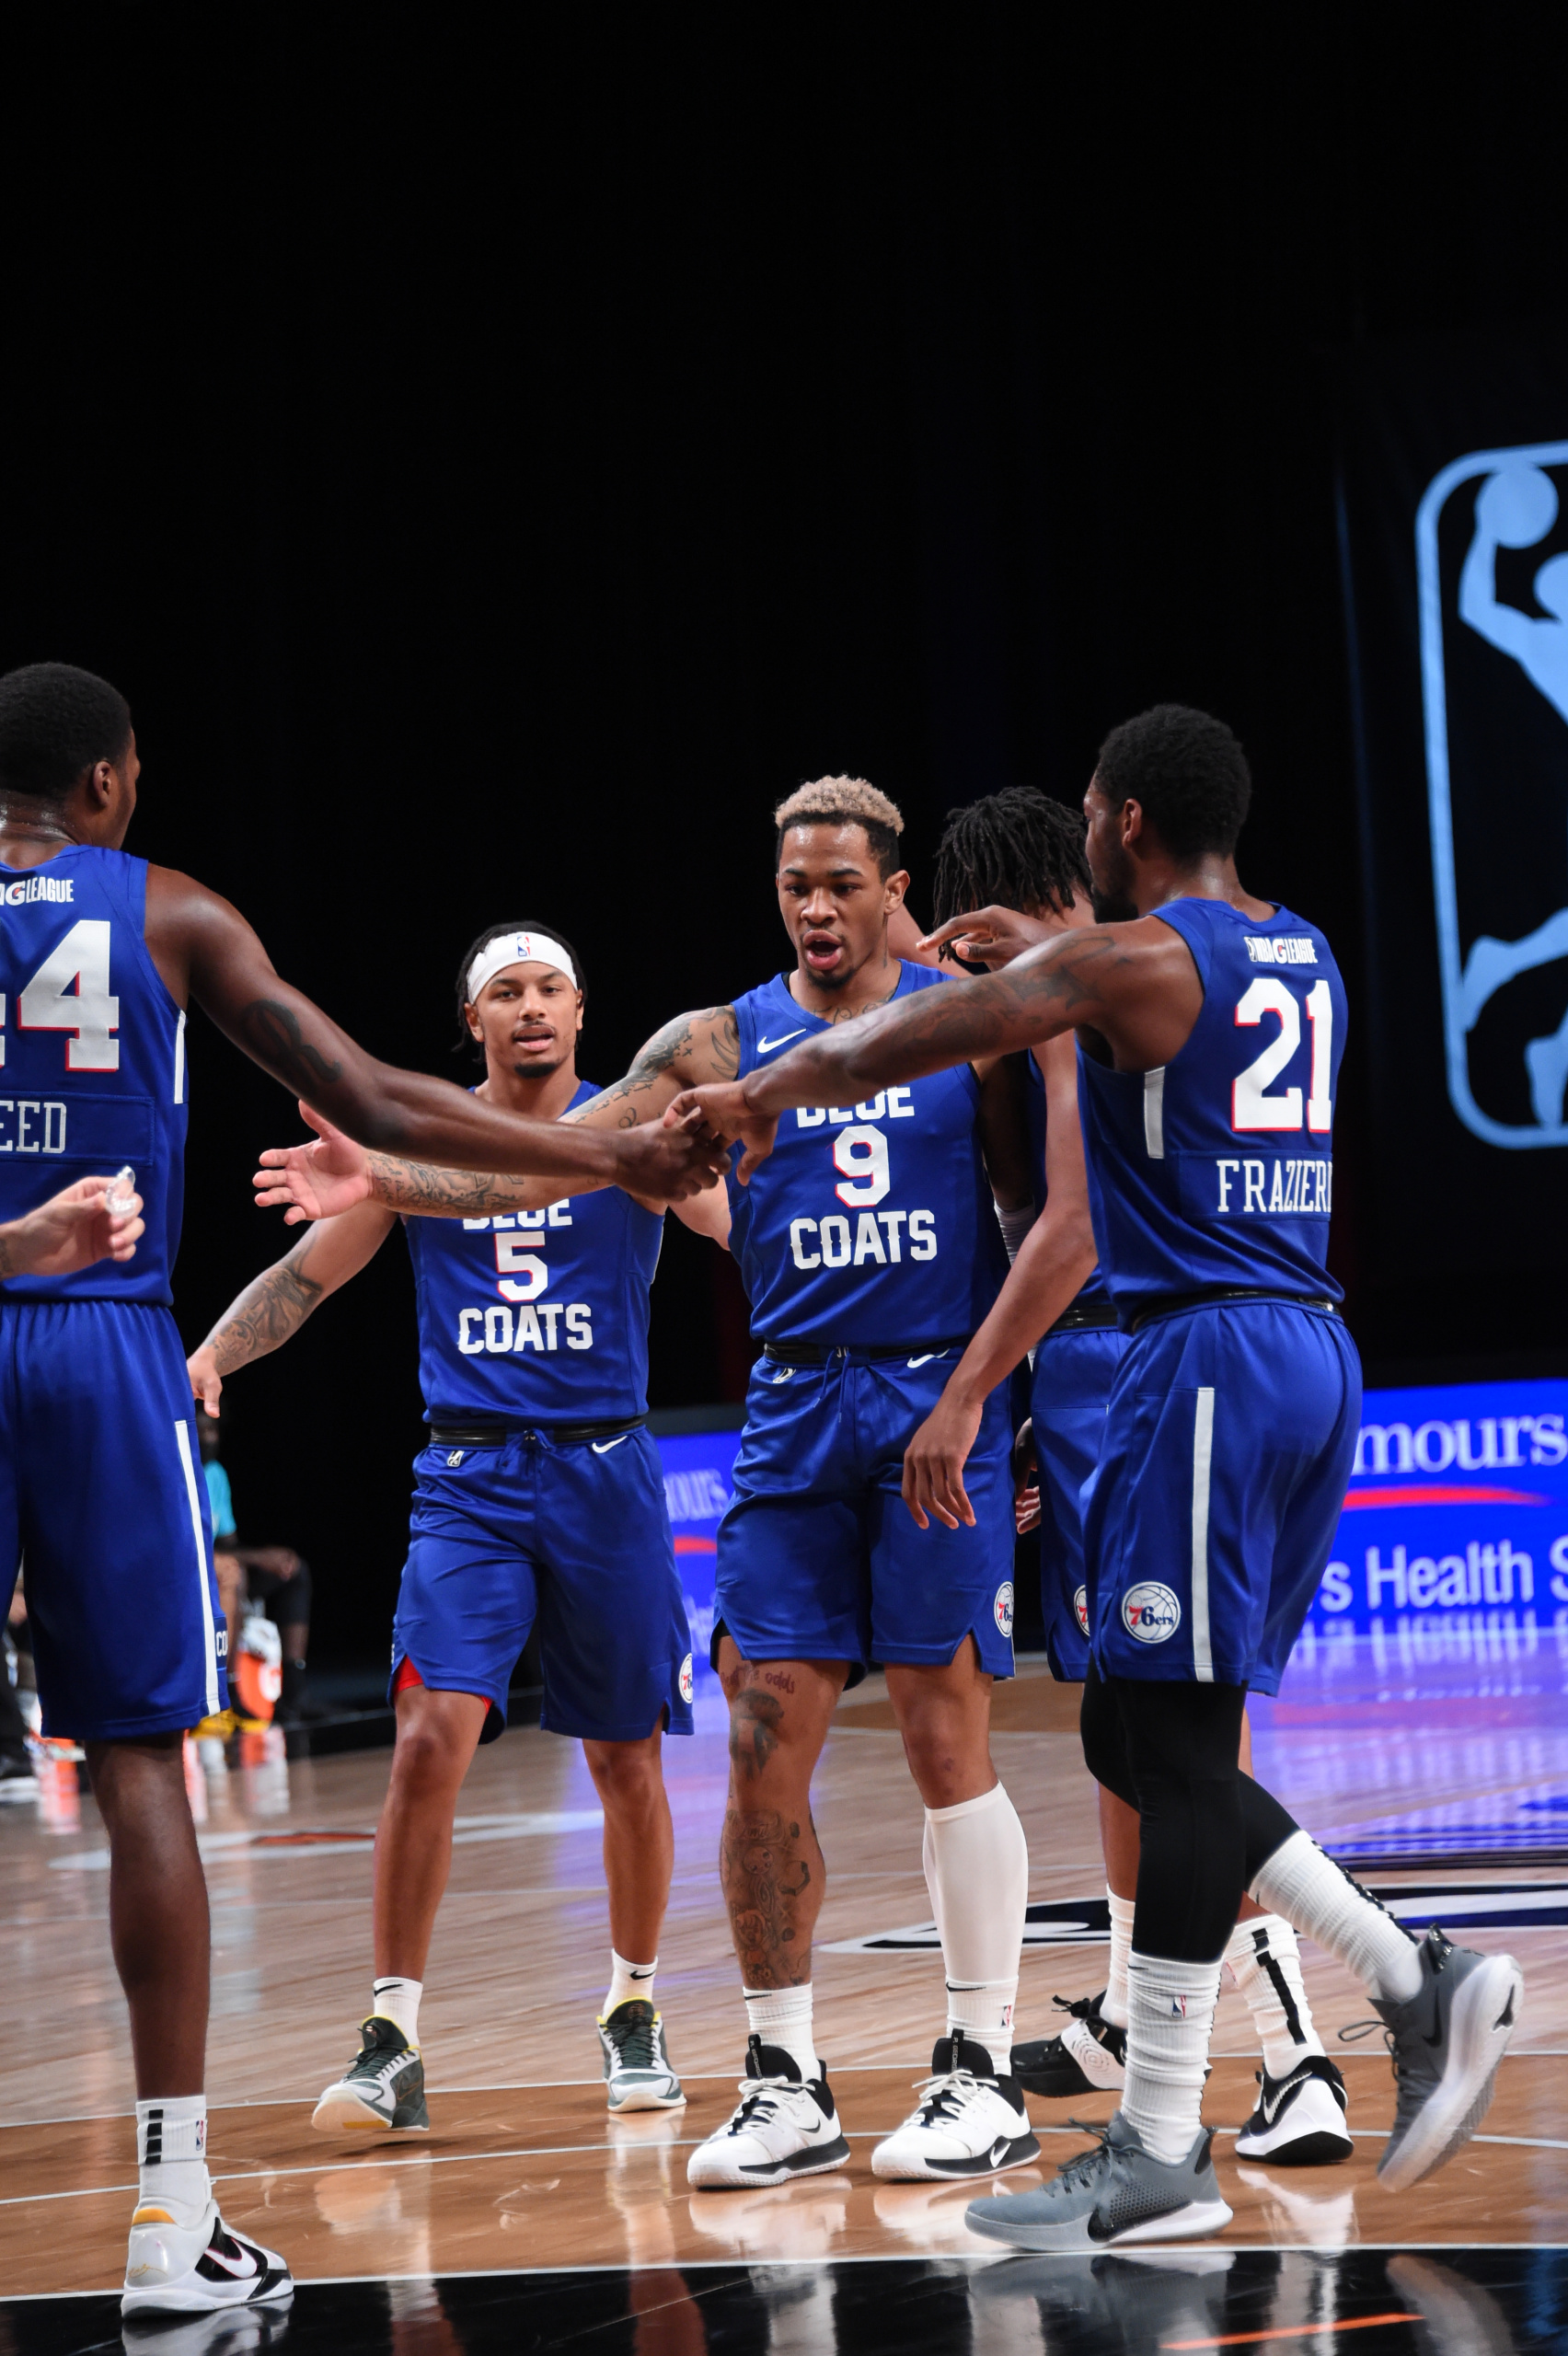 BLUE COATS CRUISE PAST SWARM TO IMPROVE TO 4-0